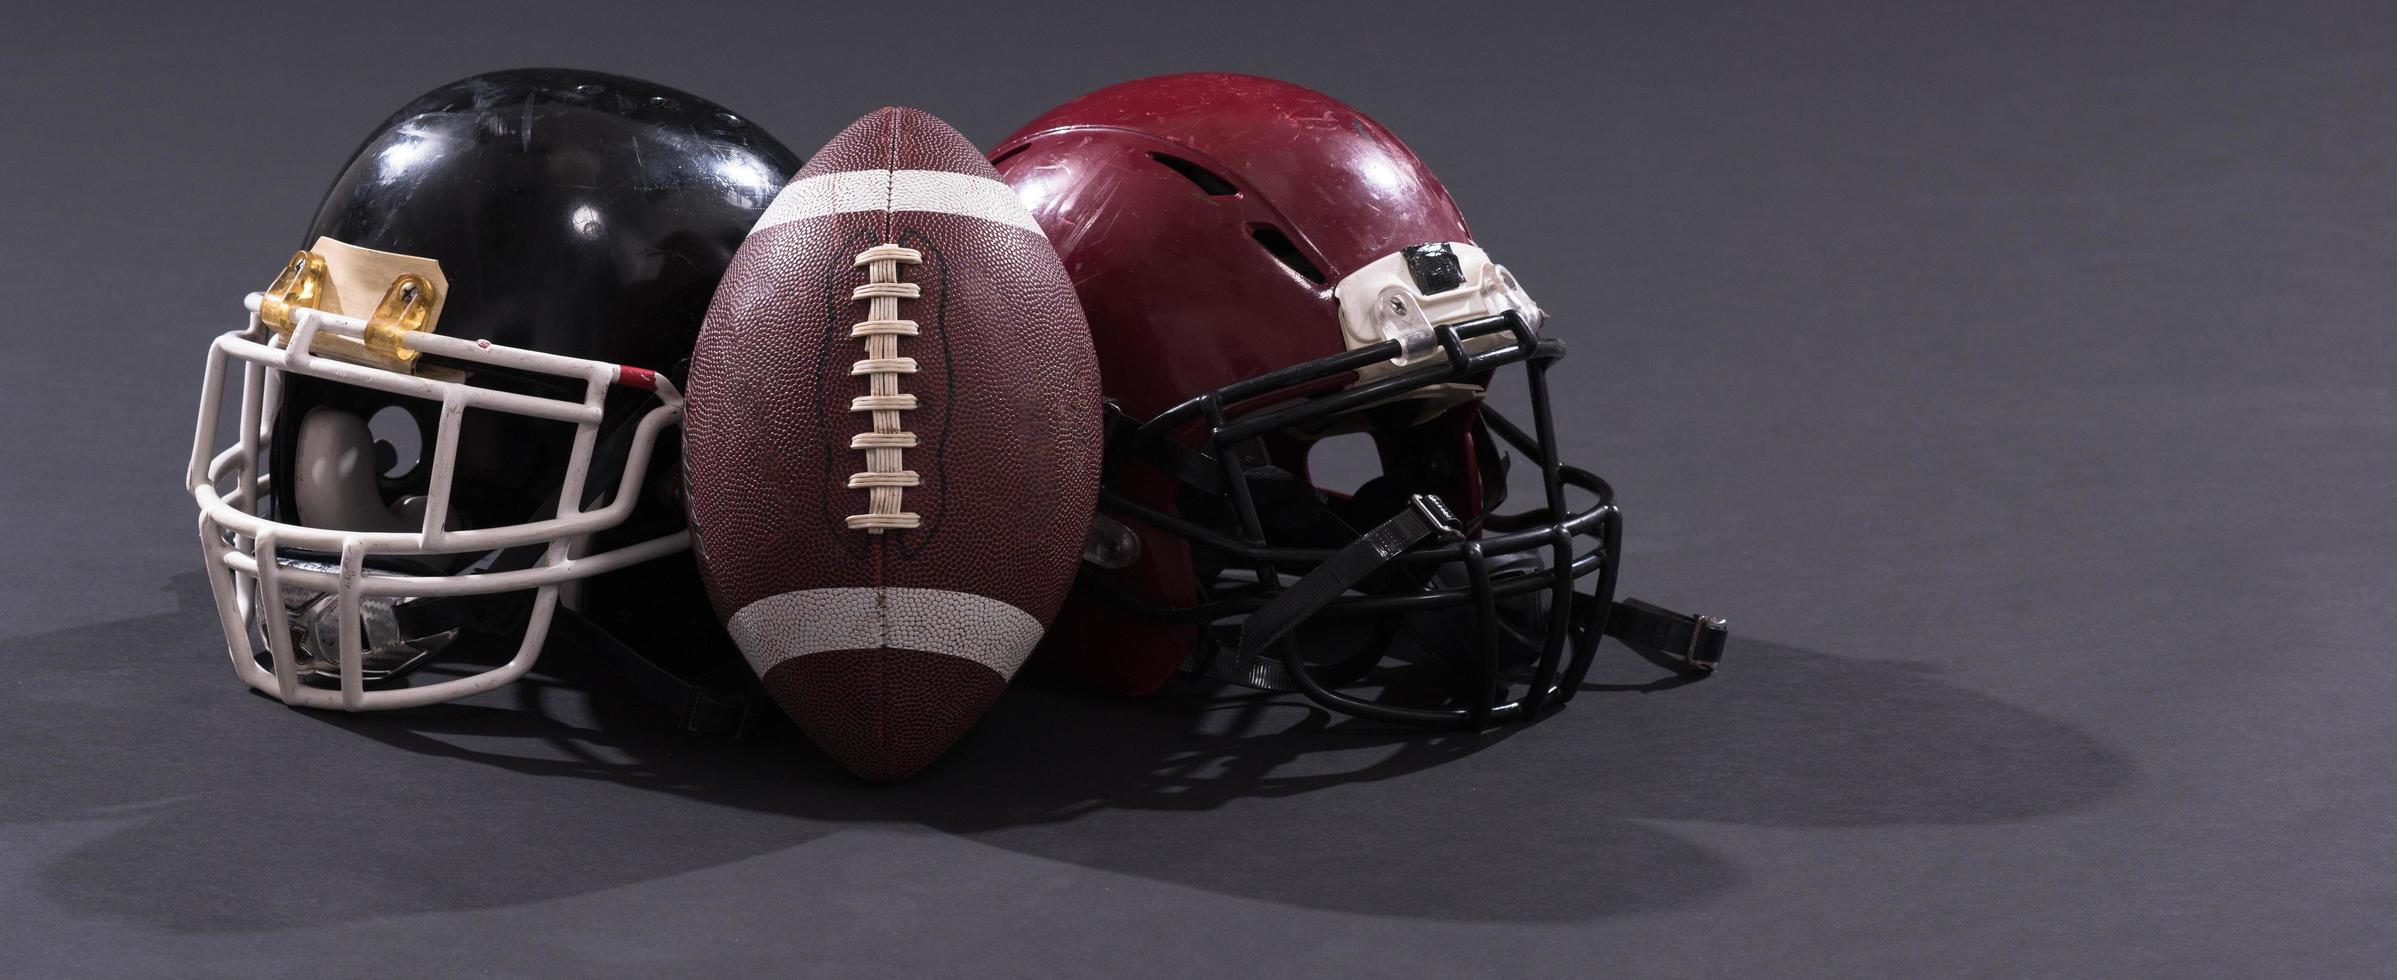 american football and helmets isolated on gray photo